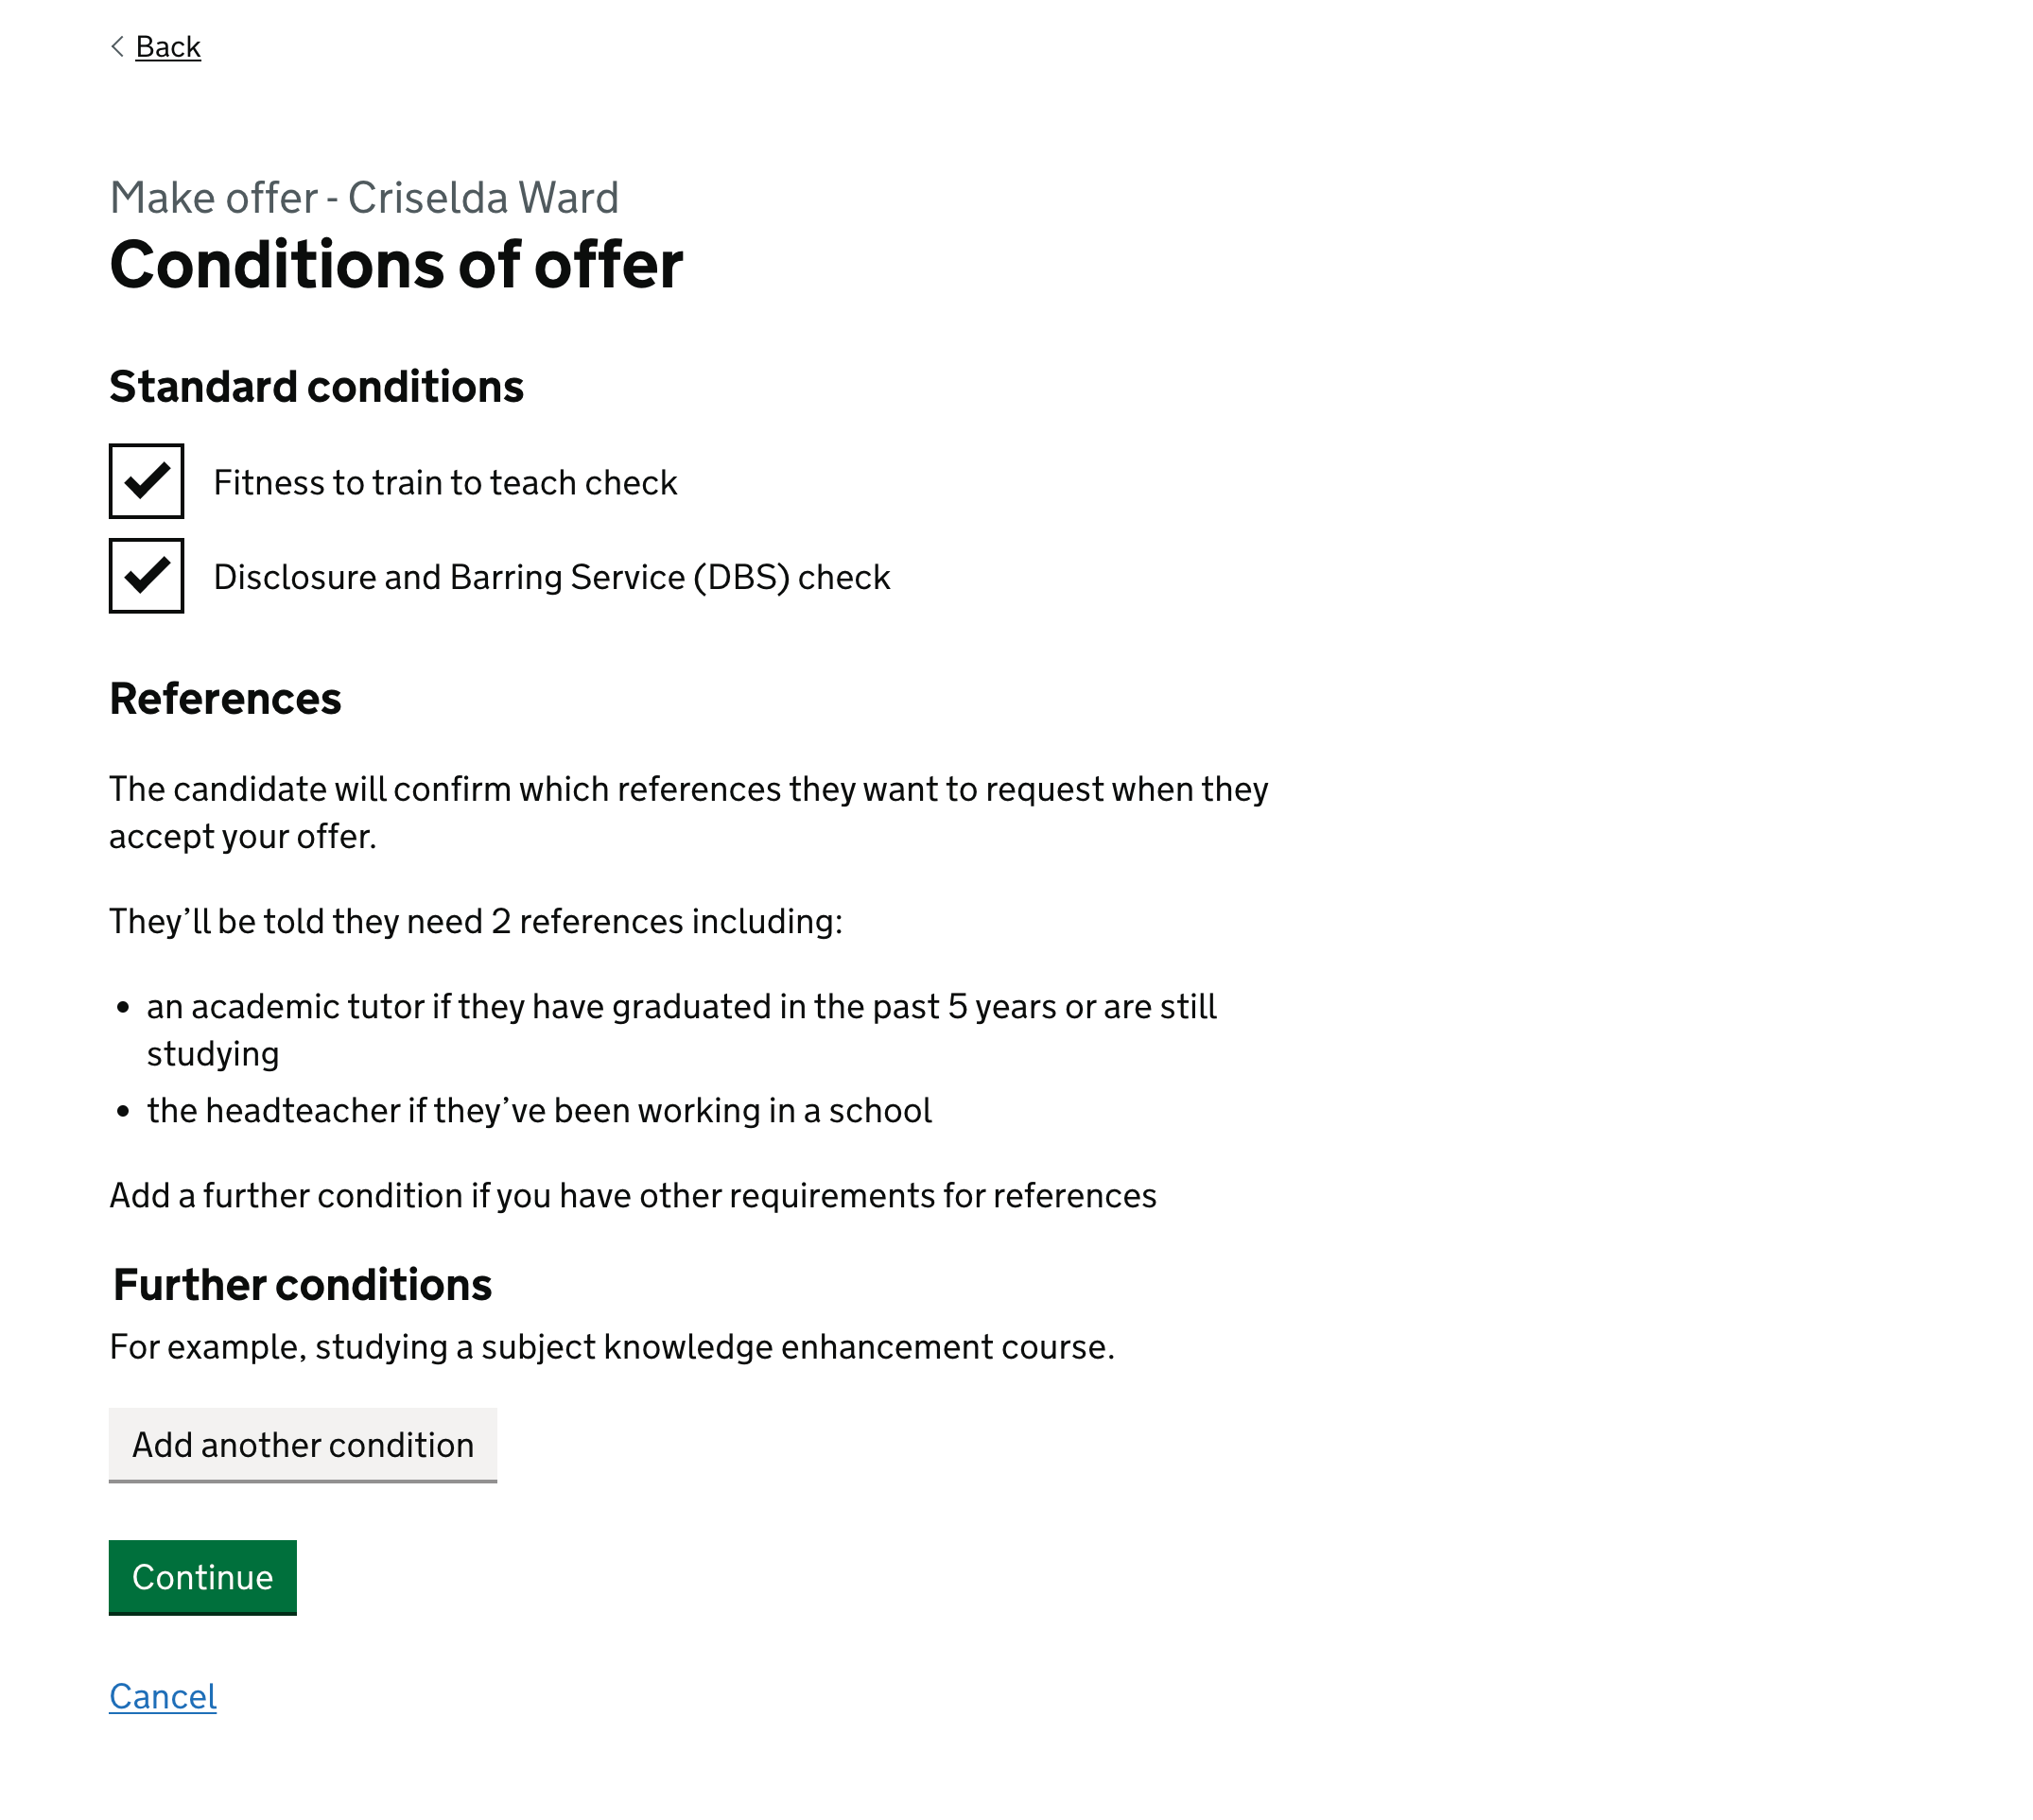 Screenshot of a page with the title ‘Conditions of offer‘. The first section is ‘Standard conditions’, which has checkboxes for ‘Fitness to train to teach check’ and ‘Disclosure and Barring Service (DBS) check’. These have been checked. The second section is ‘References‘. It contains guidance saying “The candidate will confirm which references they want to request when they accept your offer. They’ll be told they need 2 references including an academic tutor if they have graduated in the past 5 years or are still studying, and the headteacher if they’ve been working in a school. Add a further condition if you have other requirements for references.” The third section is ‘Further conditions’ with a button to allow providers to add another condition. At the bottom of the screen is a continue button and a cancel link.